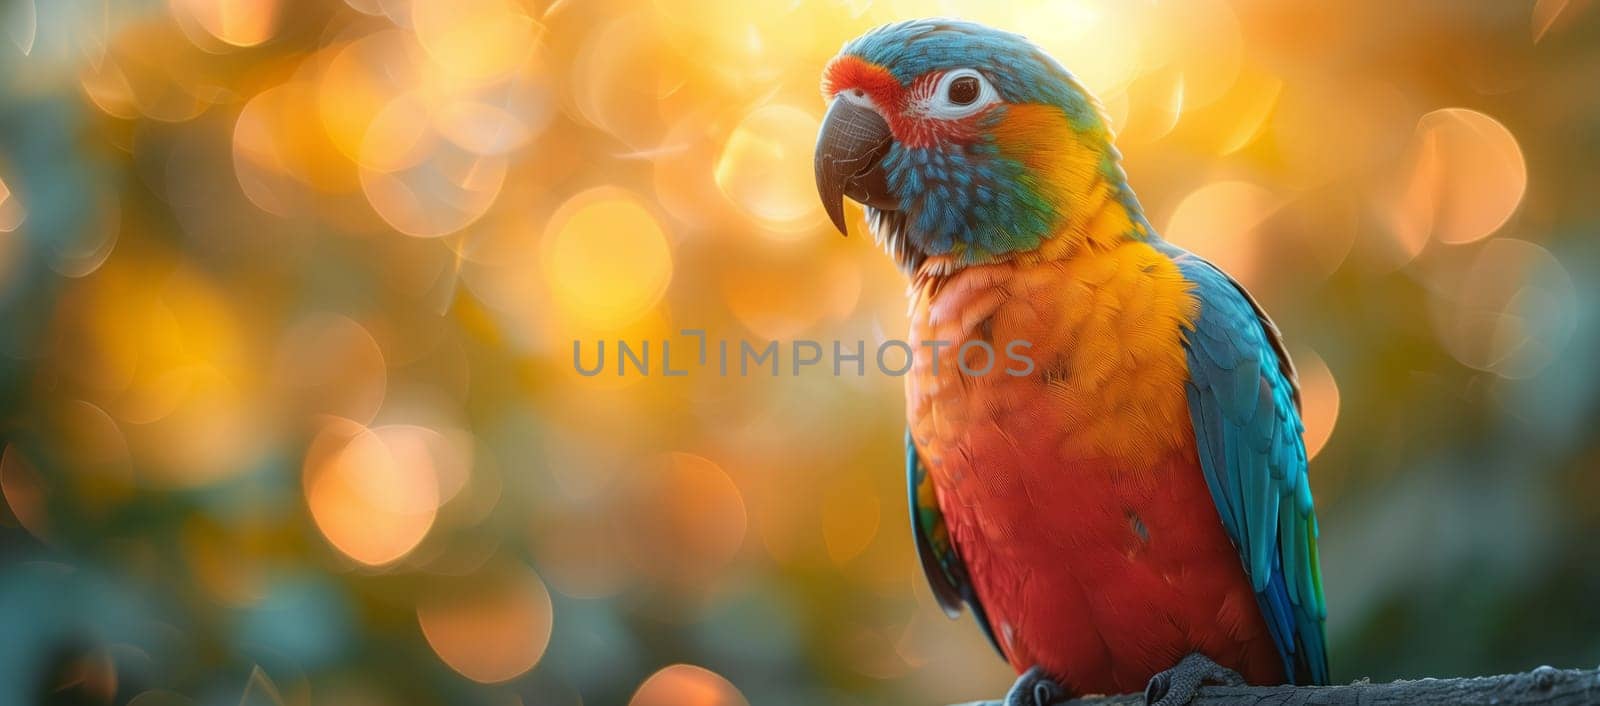 Colorful parrot on tree branch with vibrant feathers and beak by richwolf